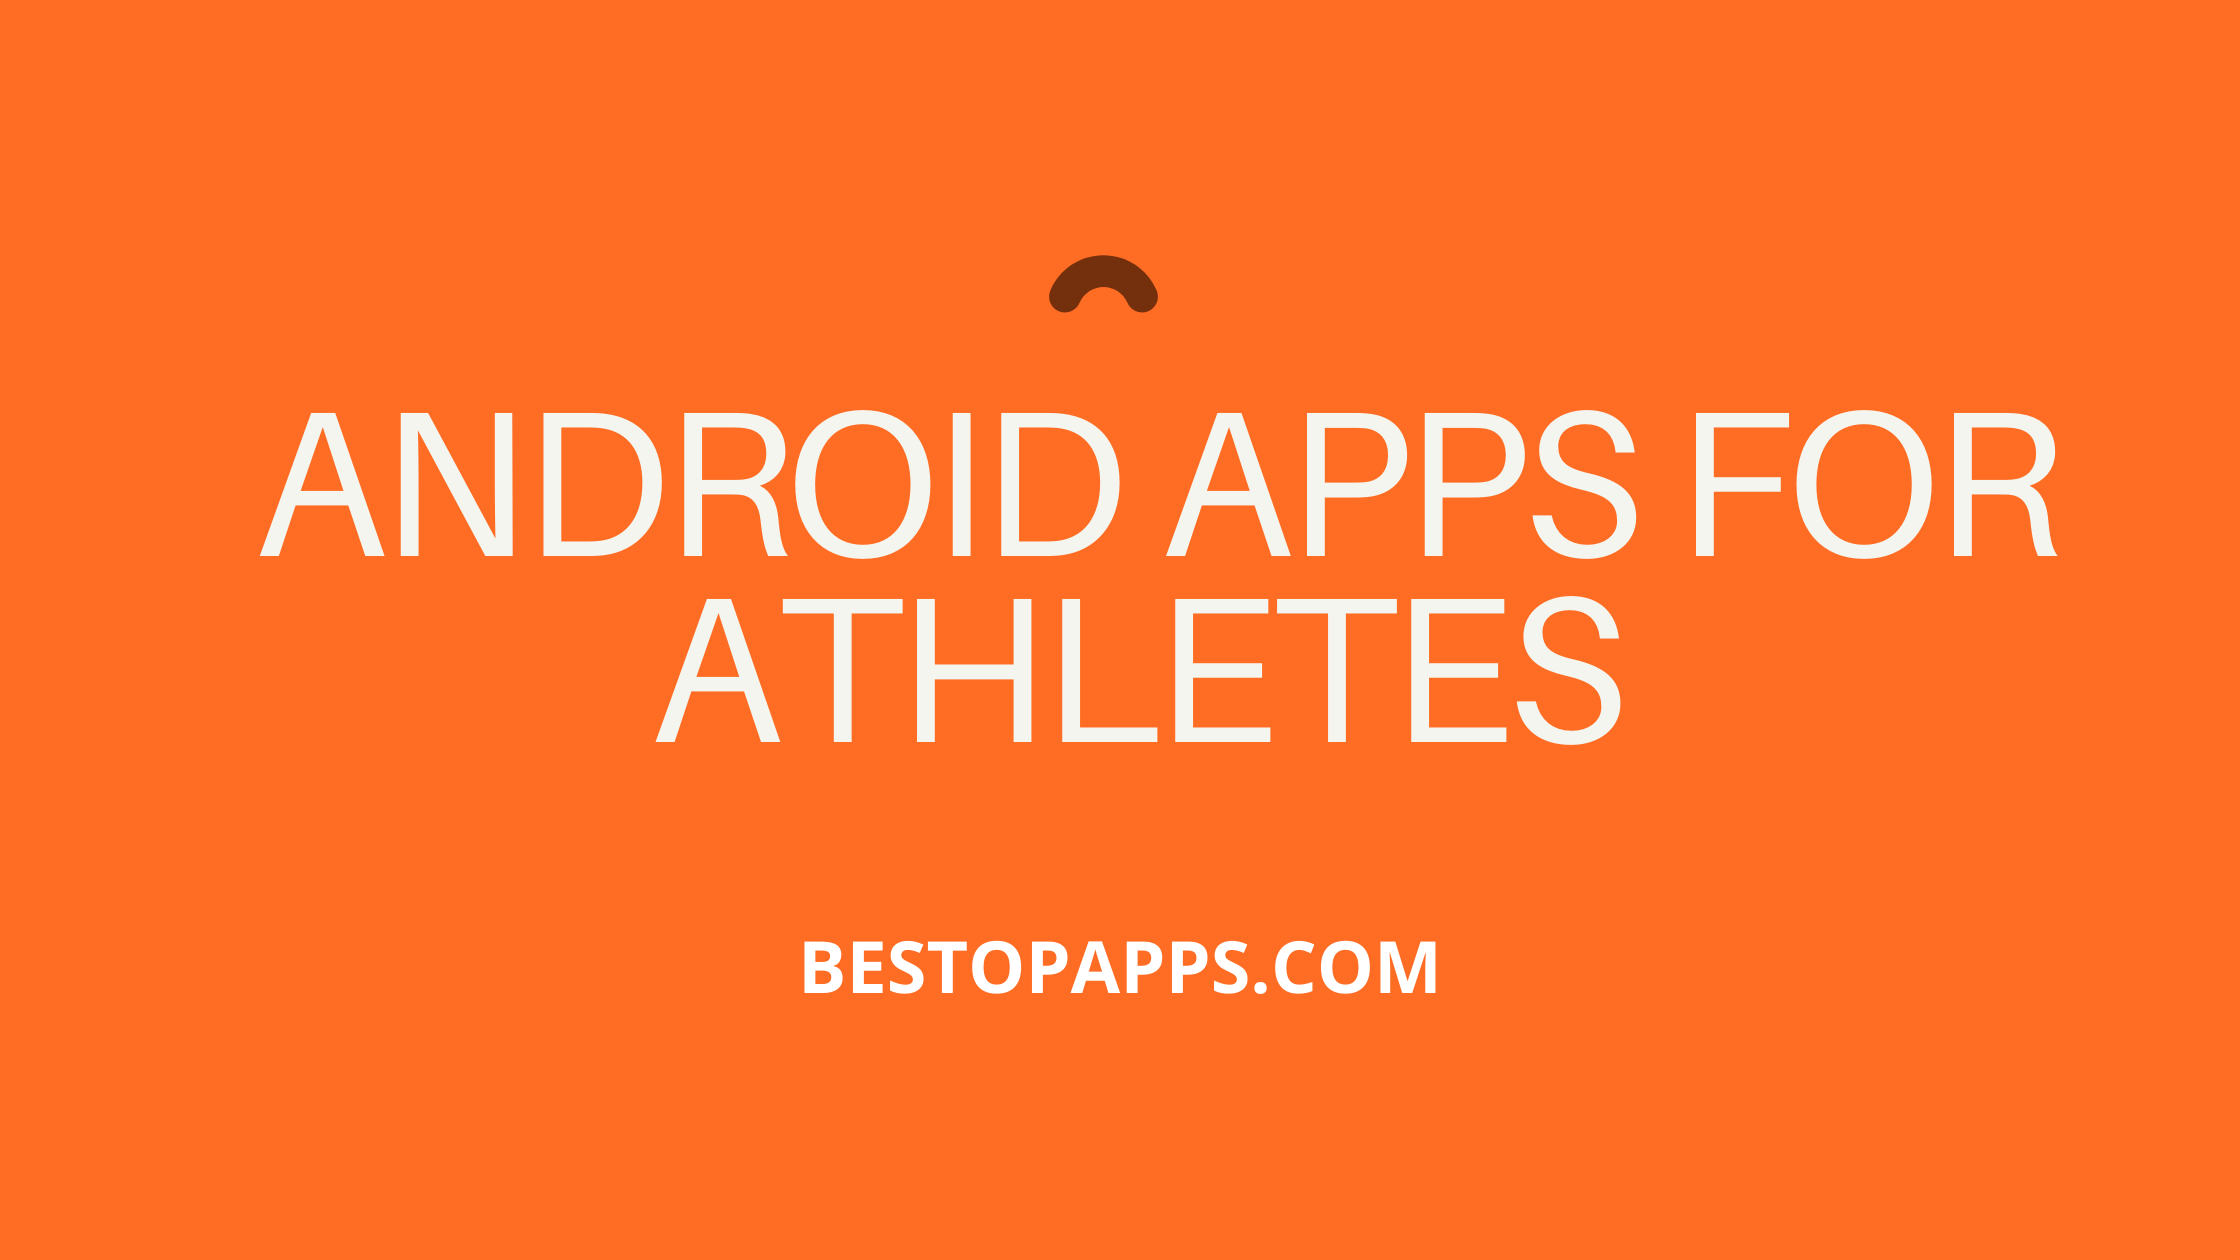 Android Apps for Athletes